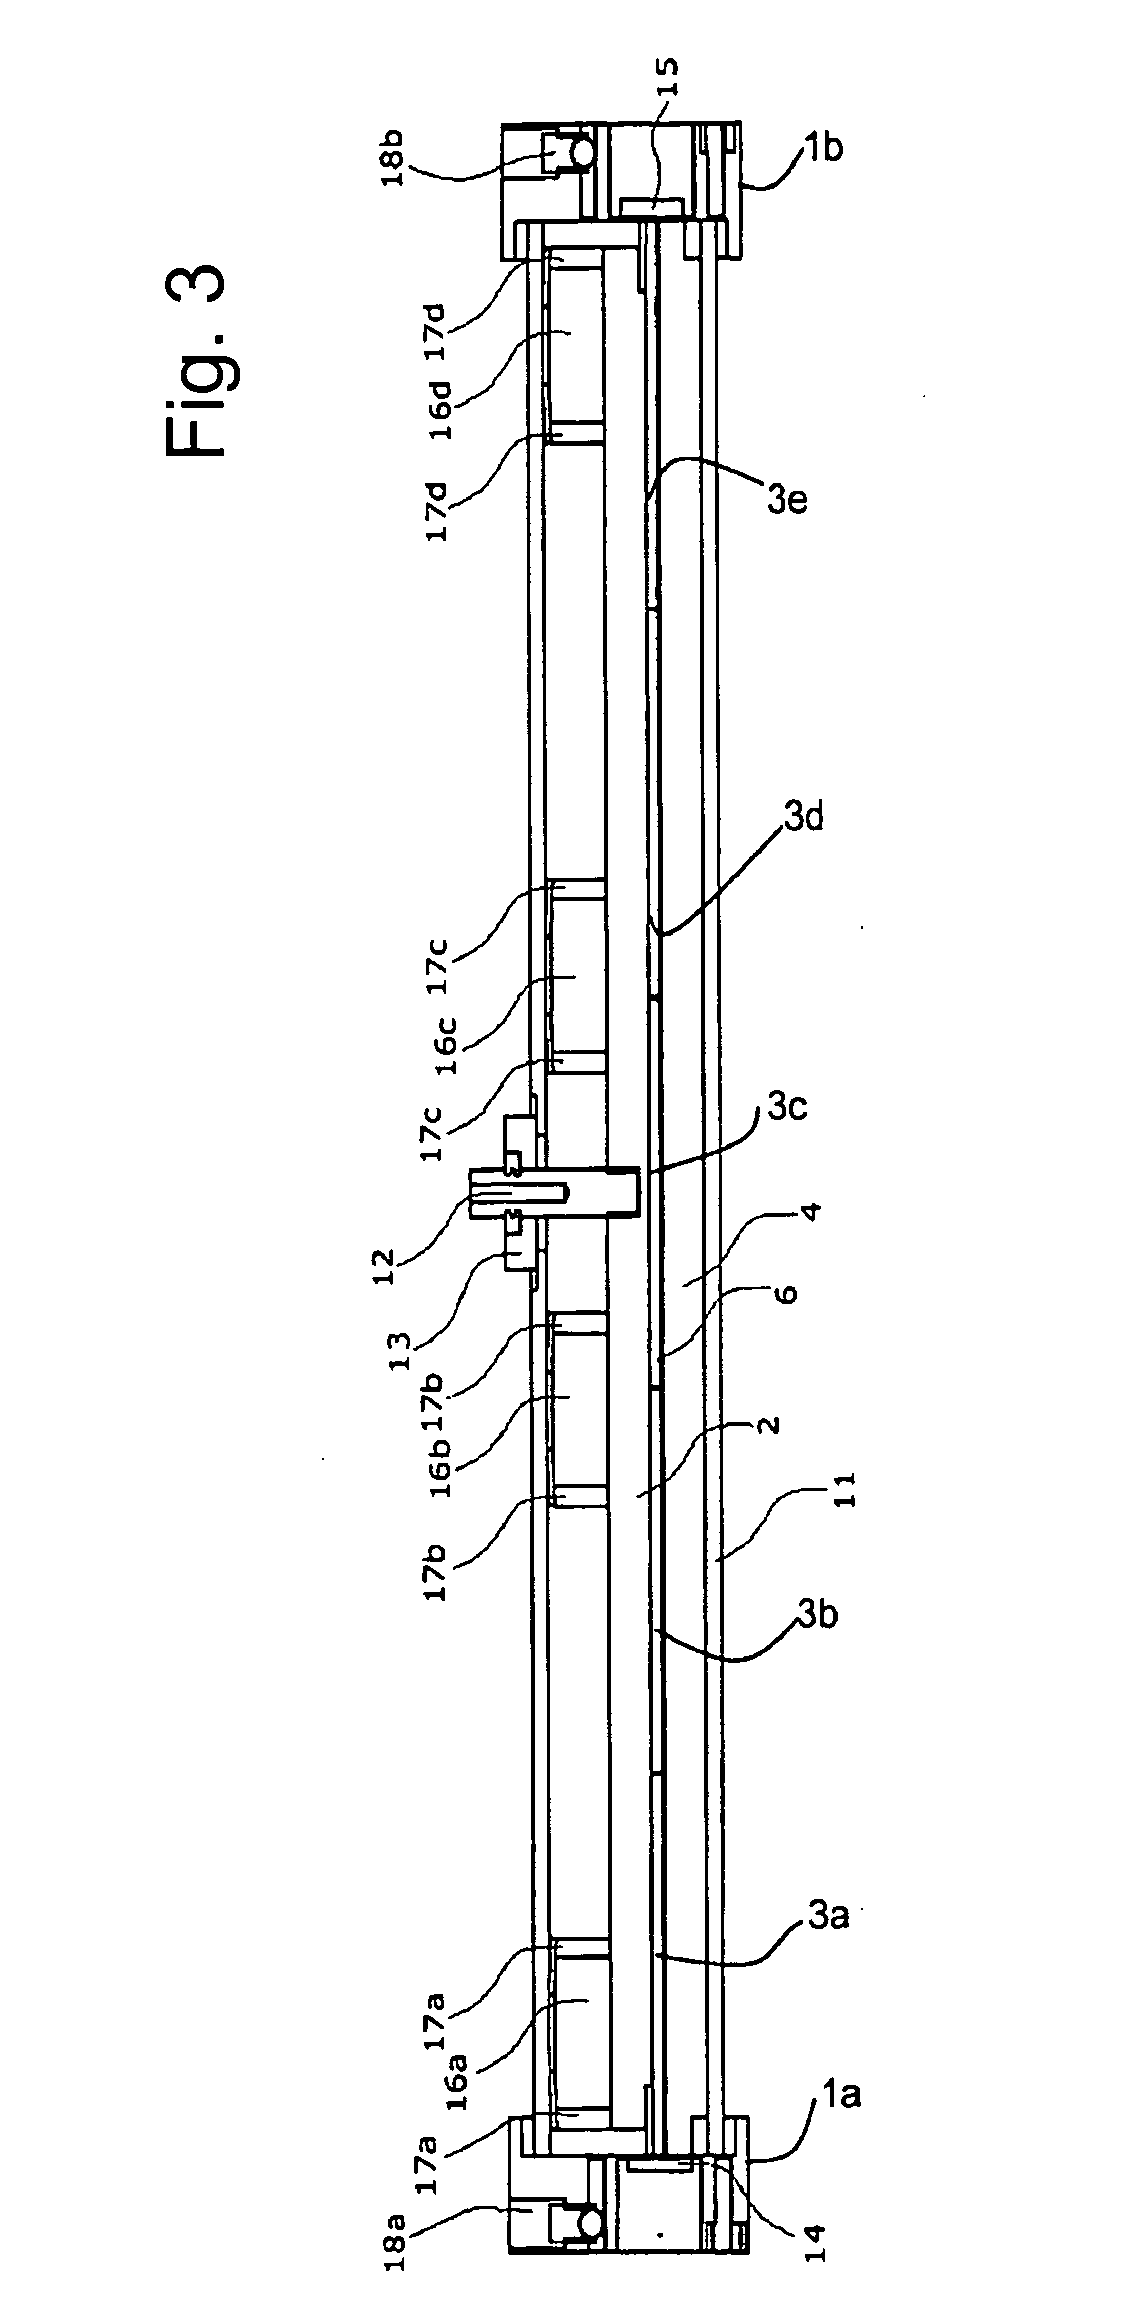 Waveguide laser having reduced cross-sectional size and/or reduced optical axis distortion